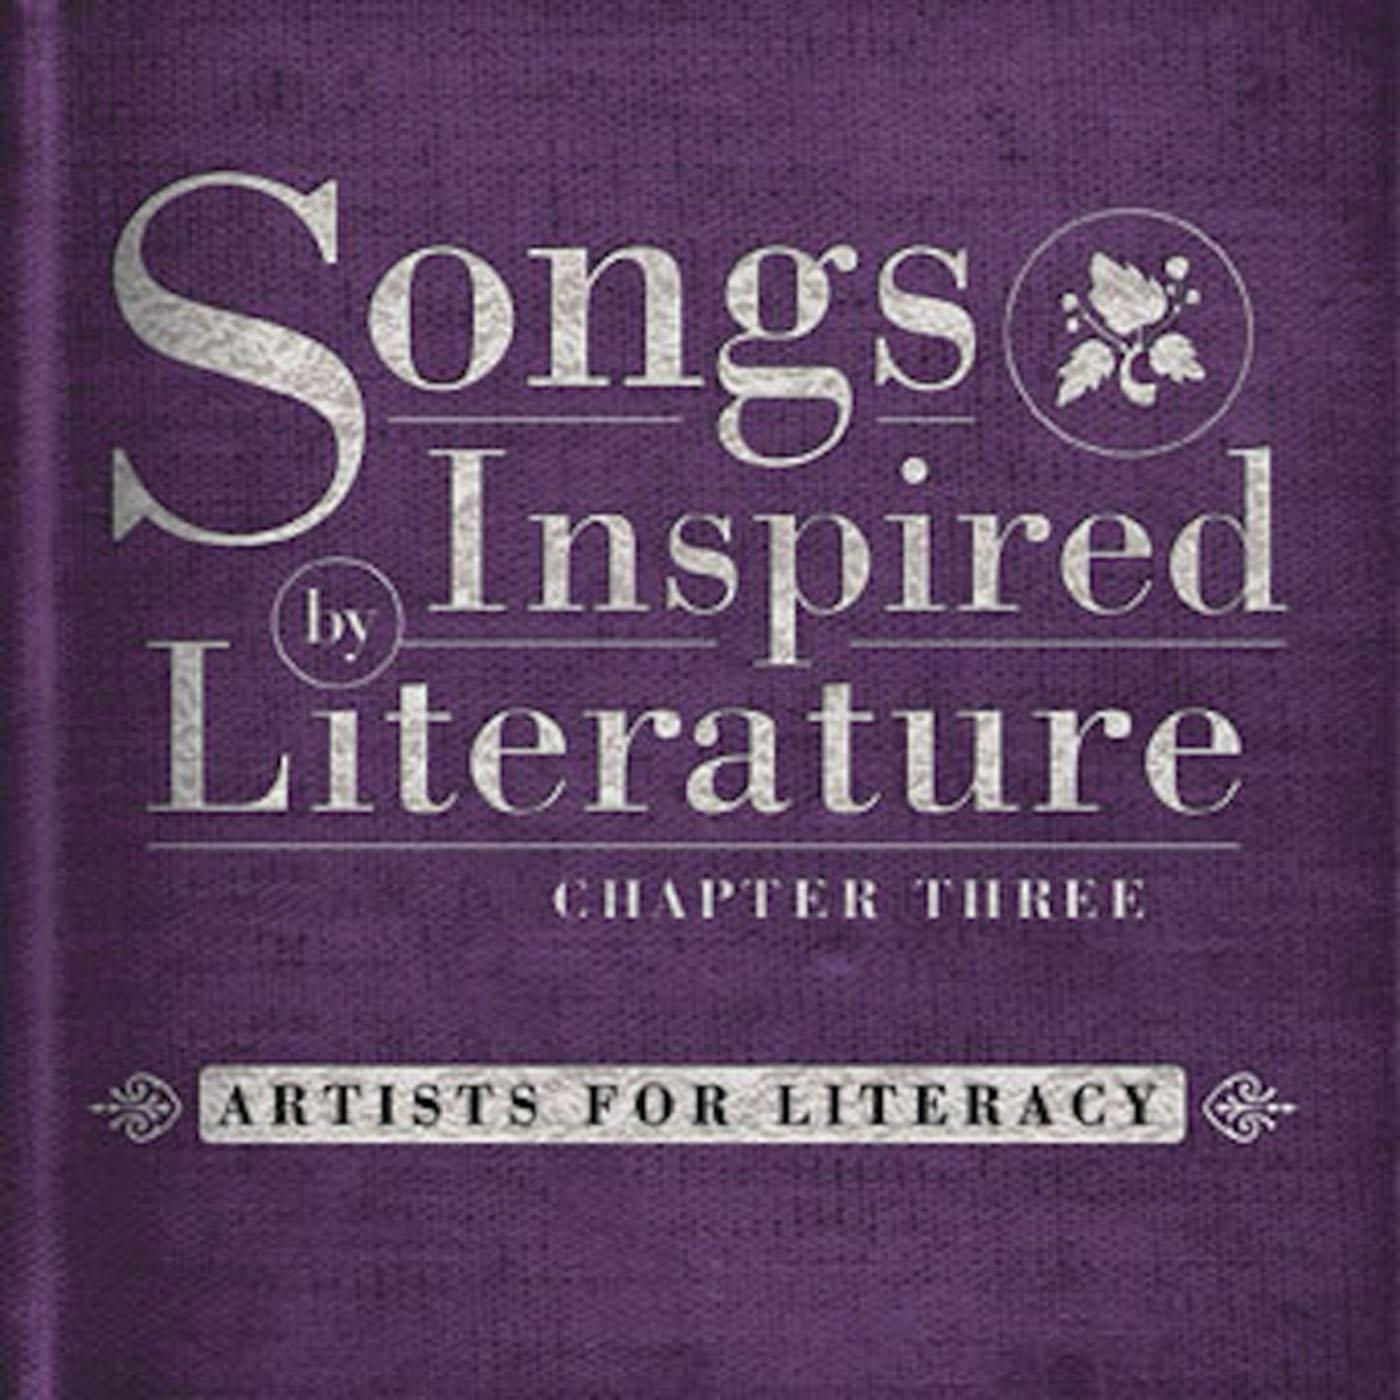 The Songs Inspired By Literature Project: Chapter Three